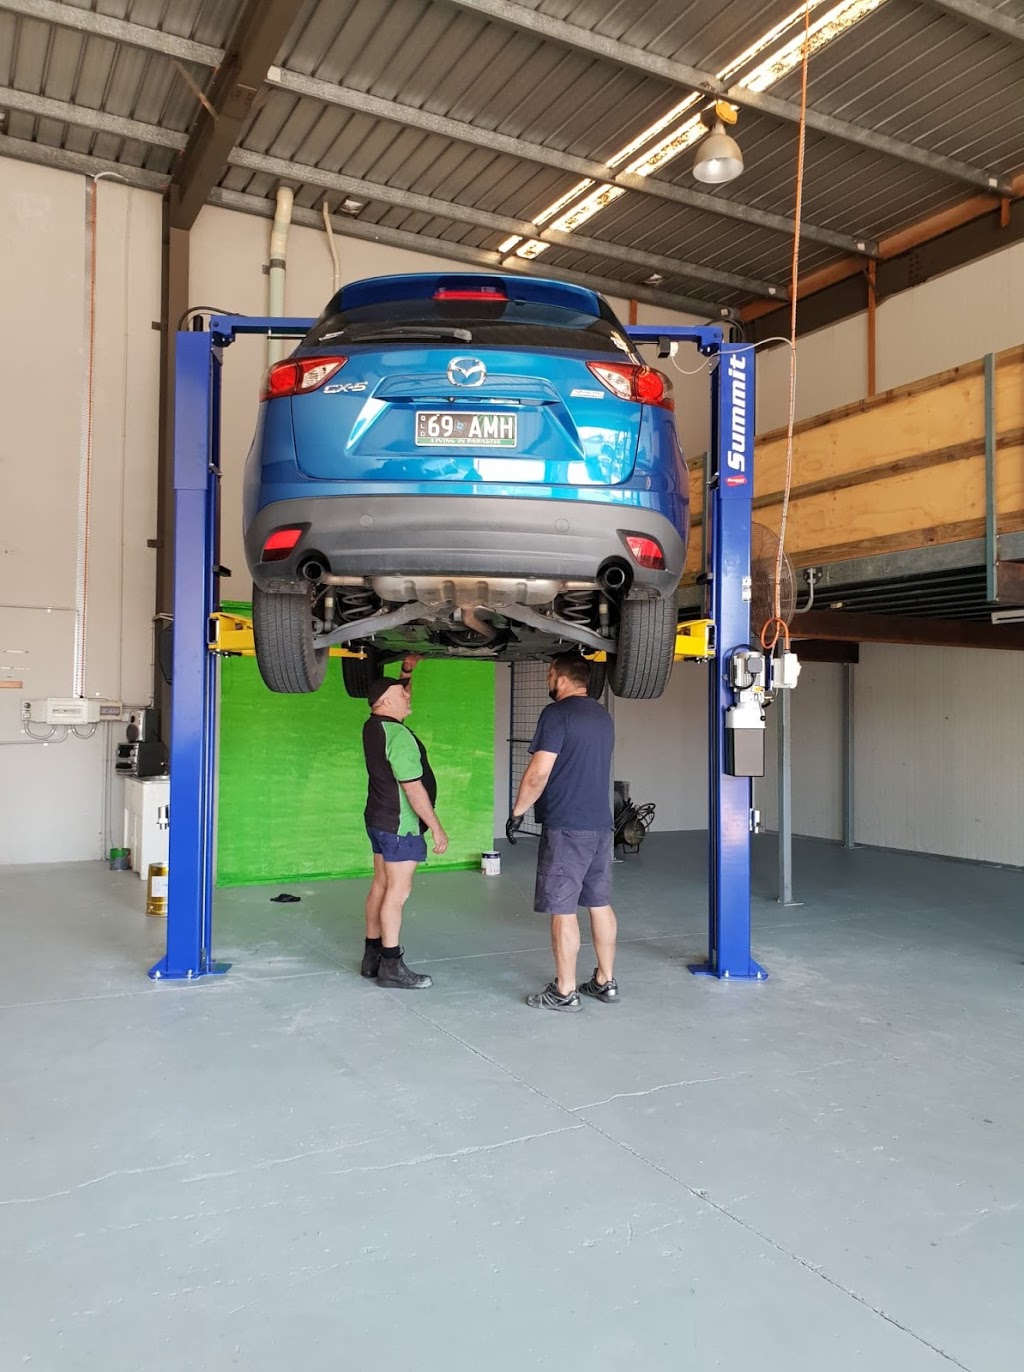 Barney Exhaust Shop Caboolture | car repair | shed 2/16 Lear Jet Dr, Caboolture QLD 4510, Australia | 54953474 OR +61 54953474